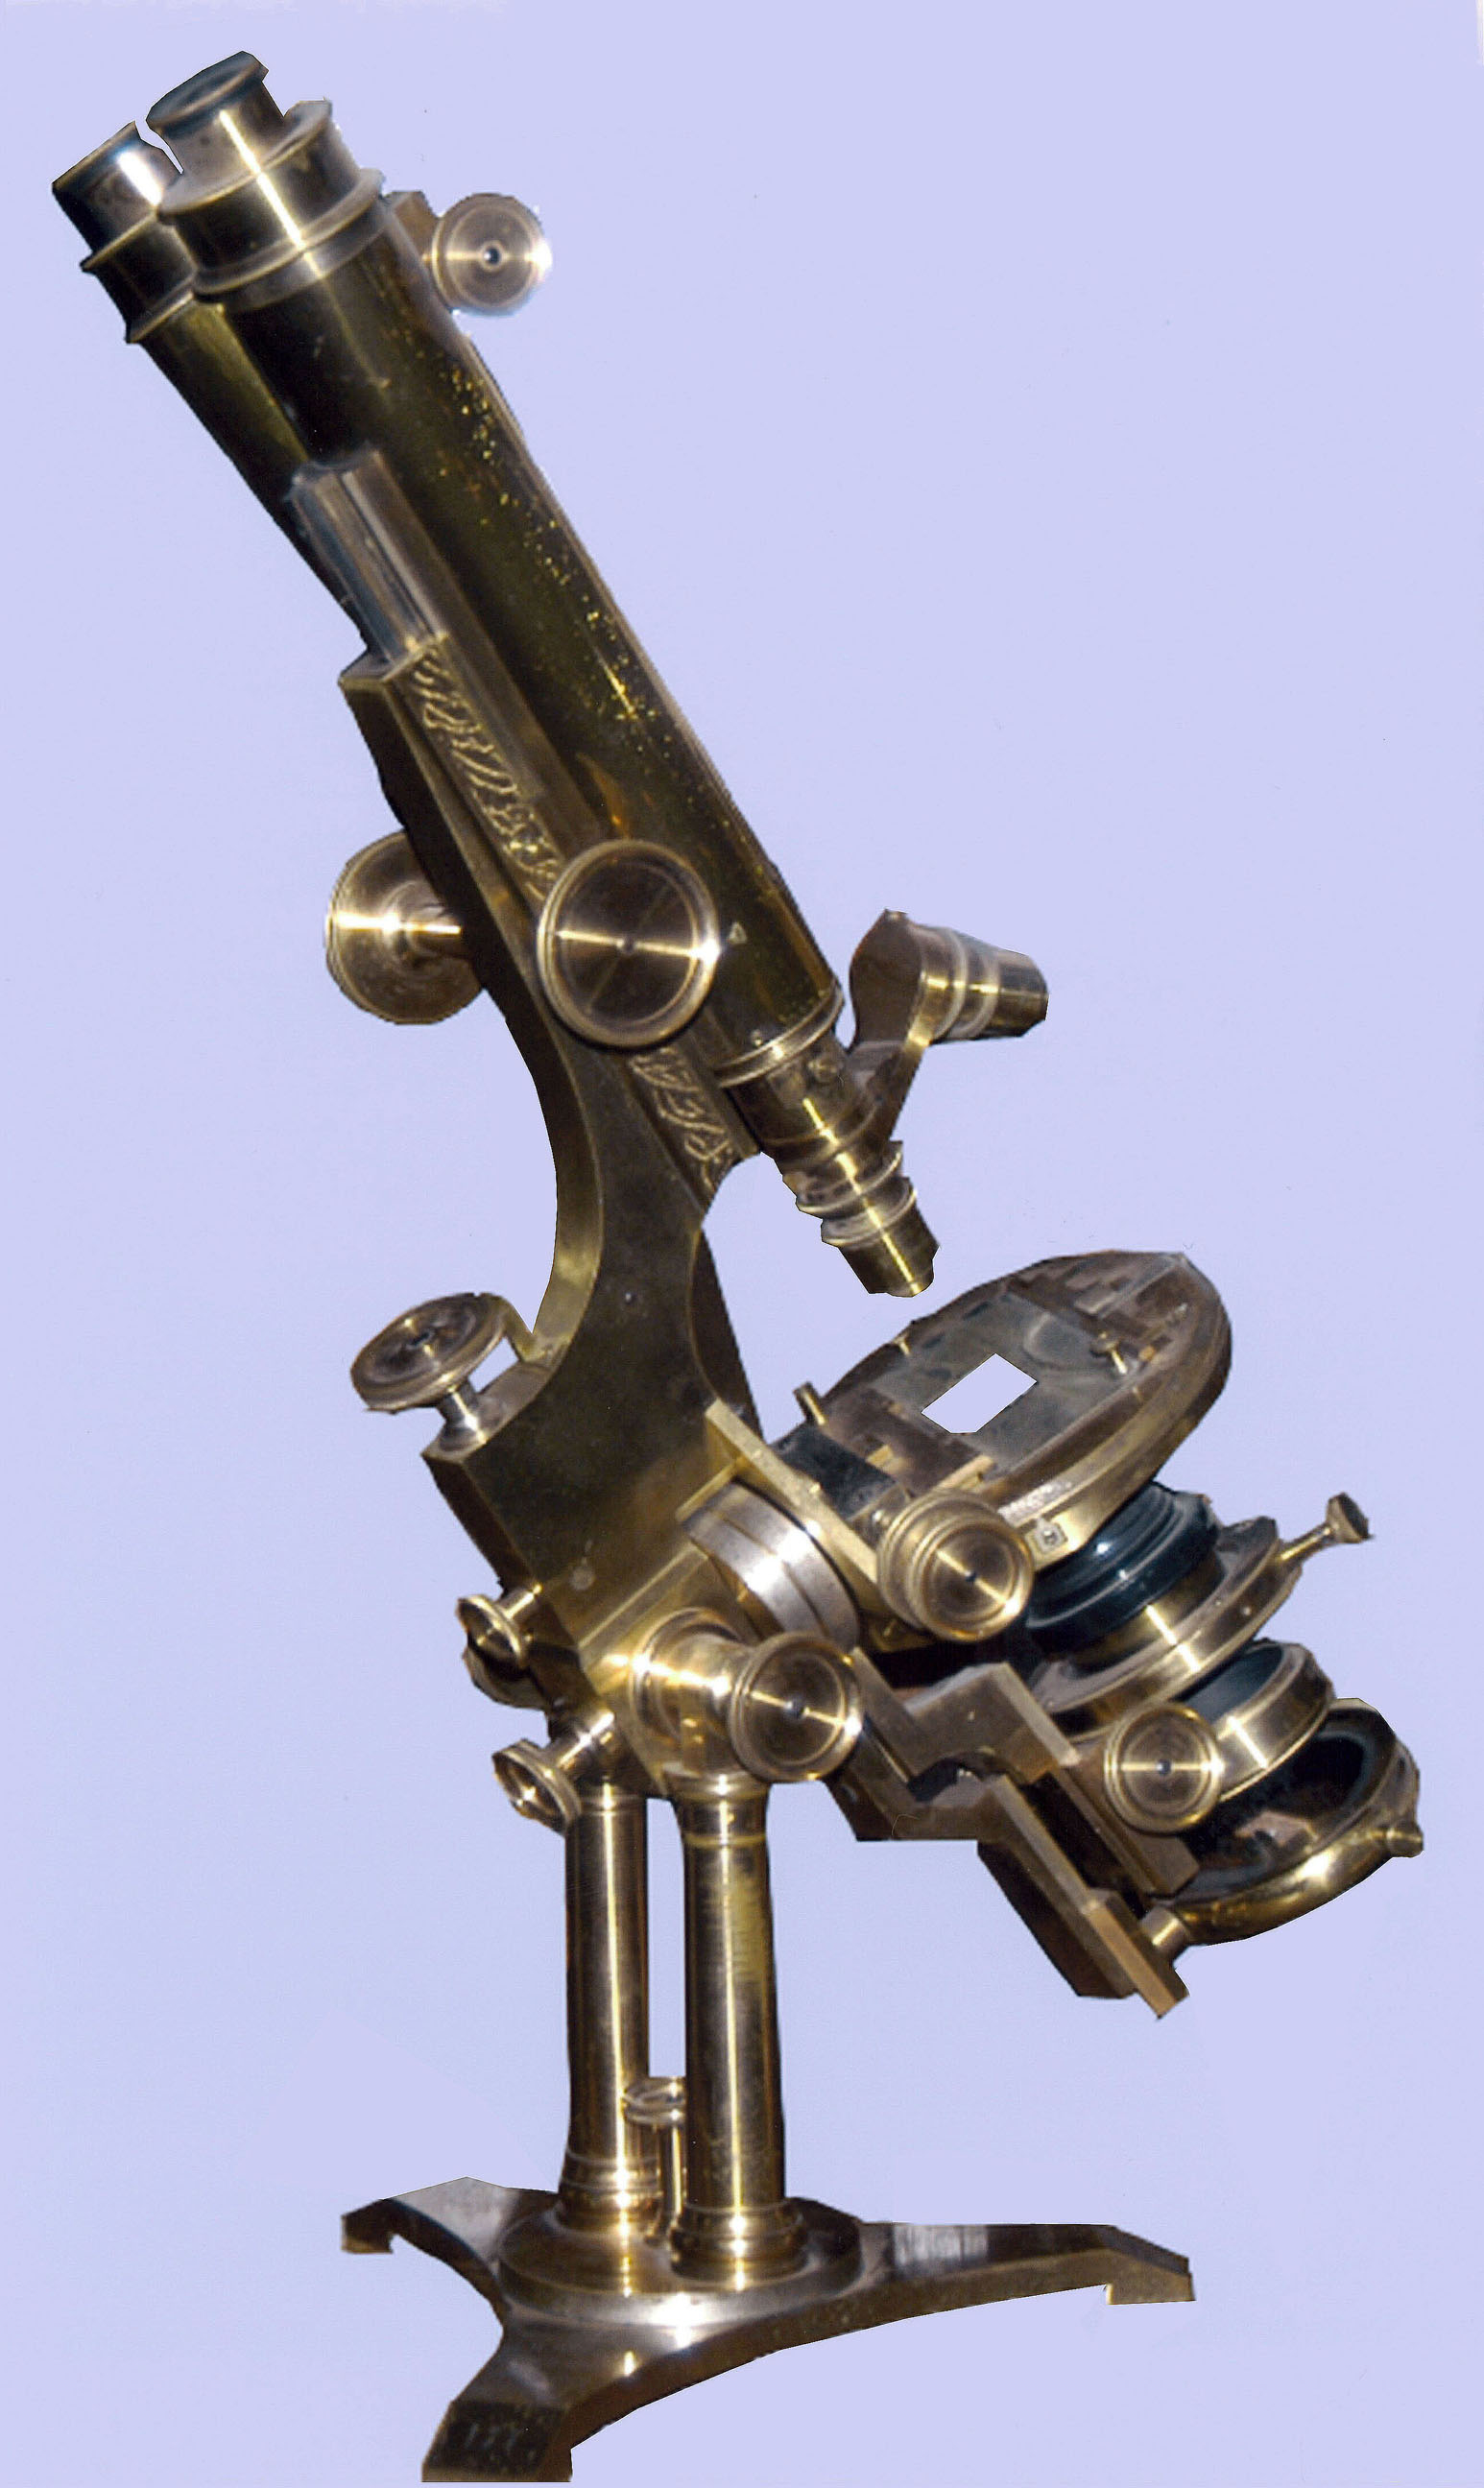 Bulloch Professional Microscope number 177